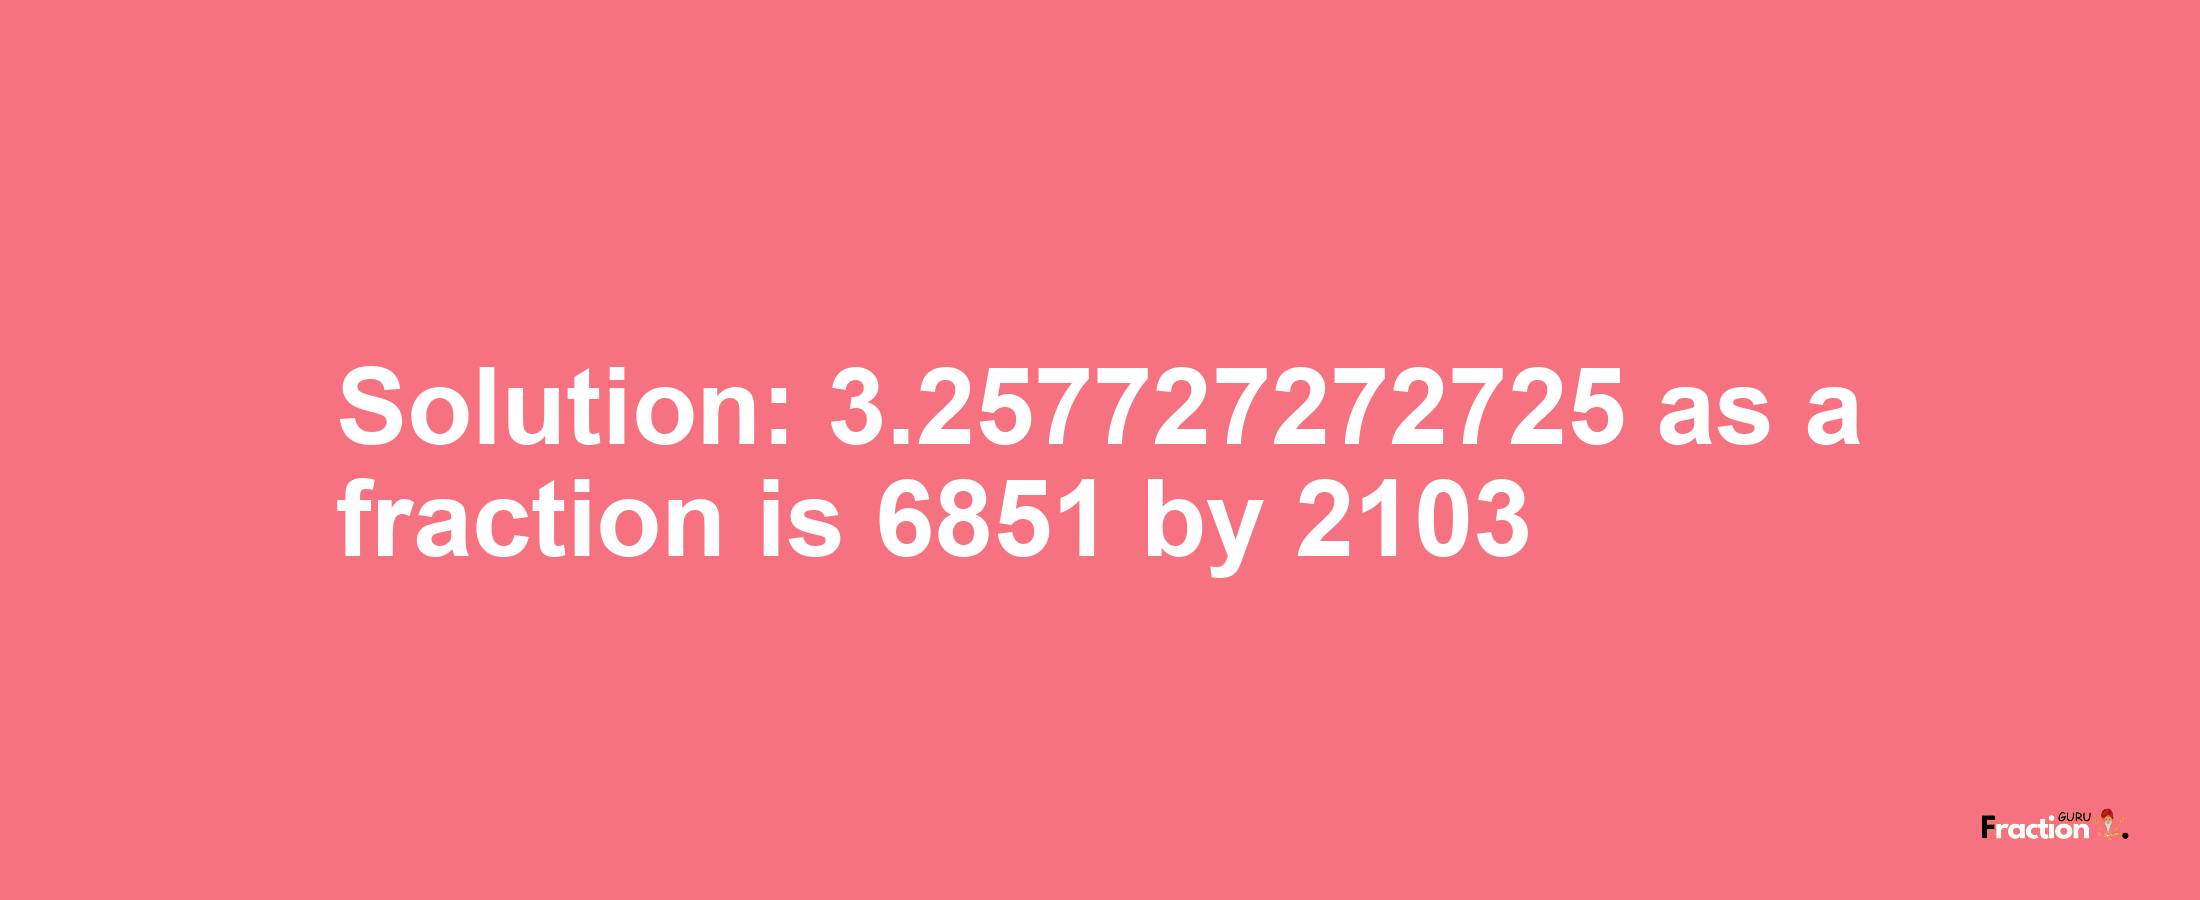 Solution:3.257727272725 as a fraction is 6851/2103